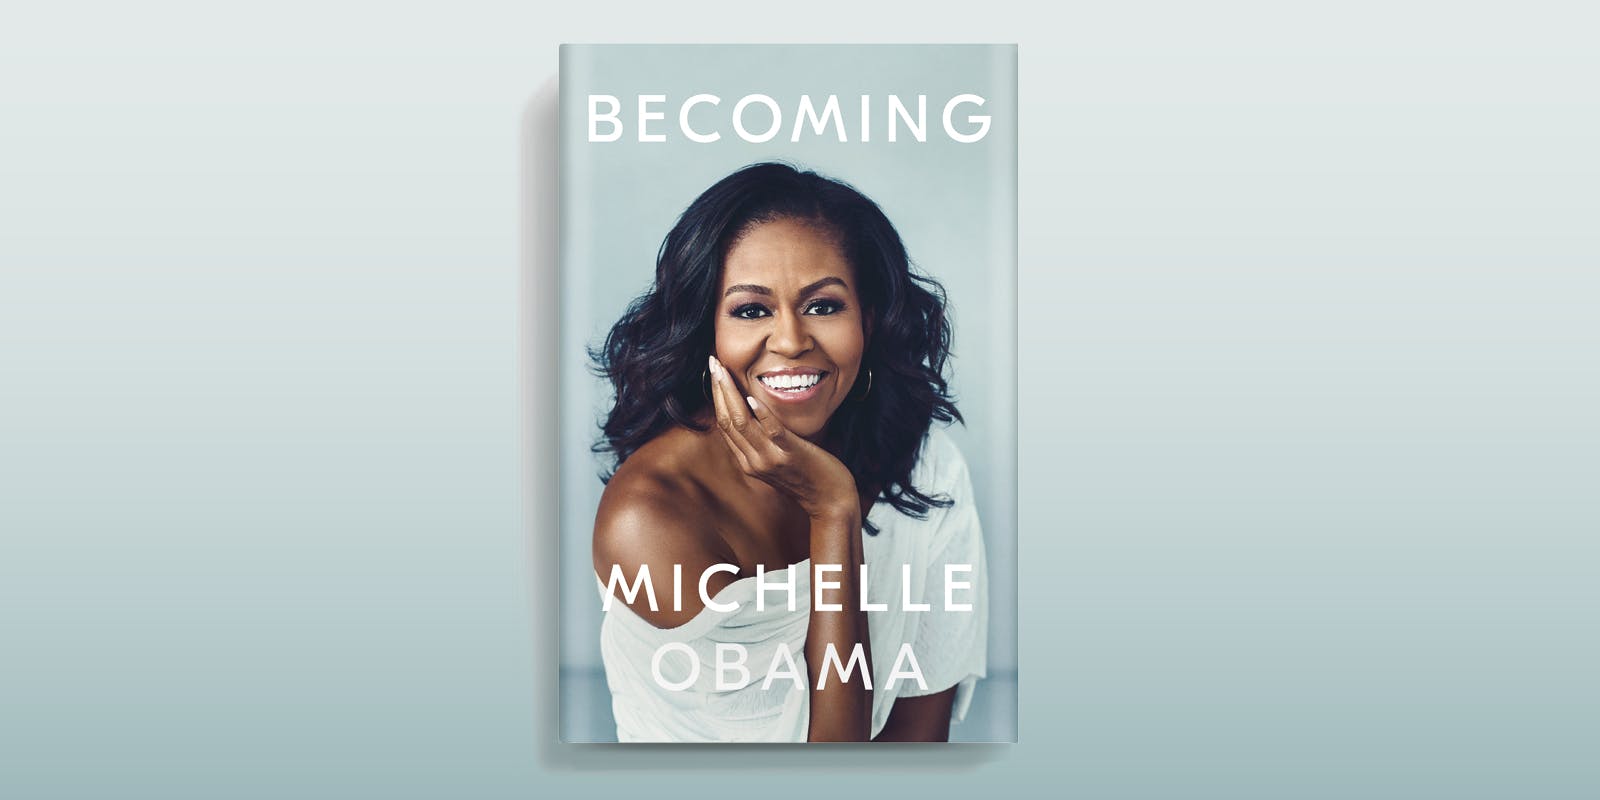 5 inspiring things we learn about Michelle Obama in Becoming